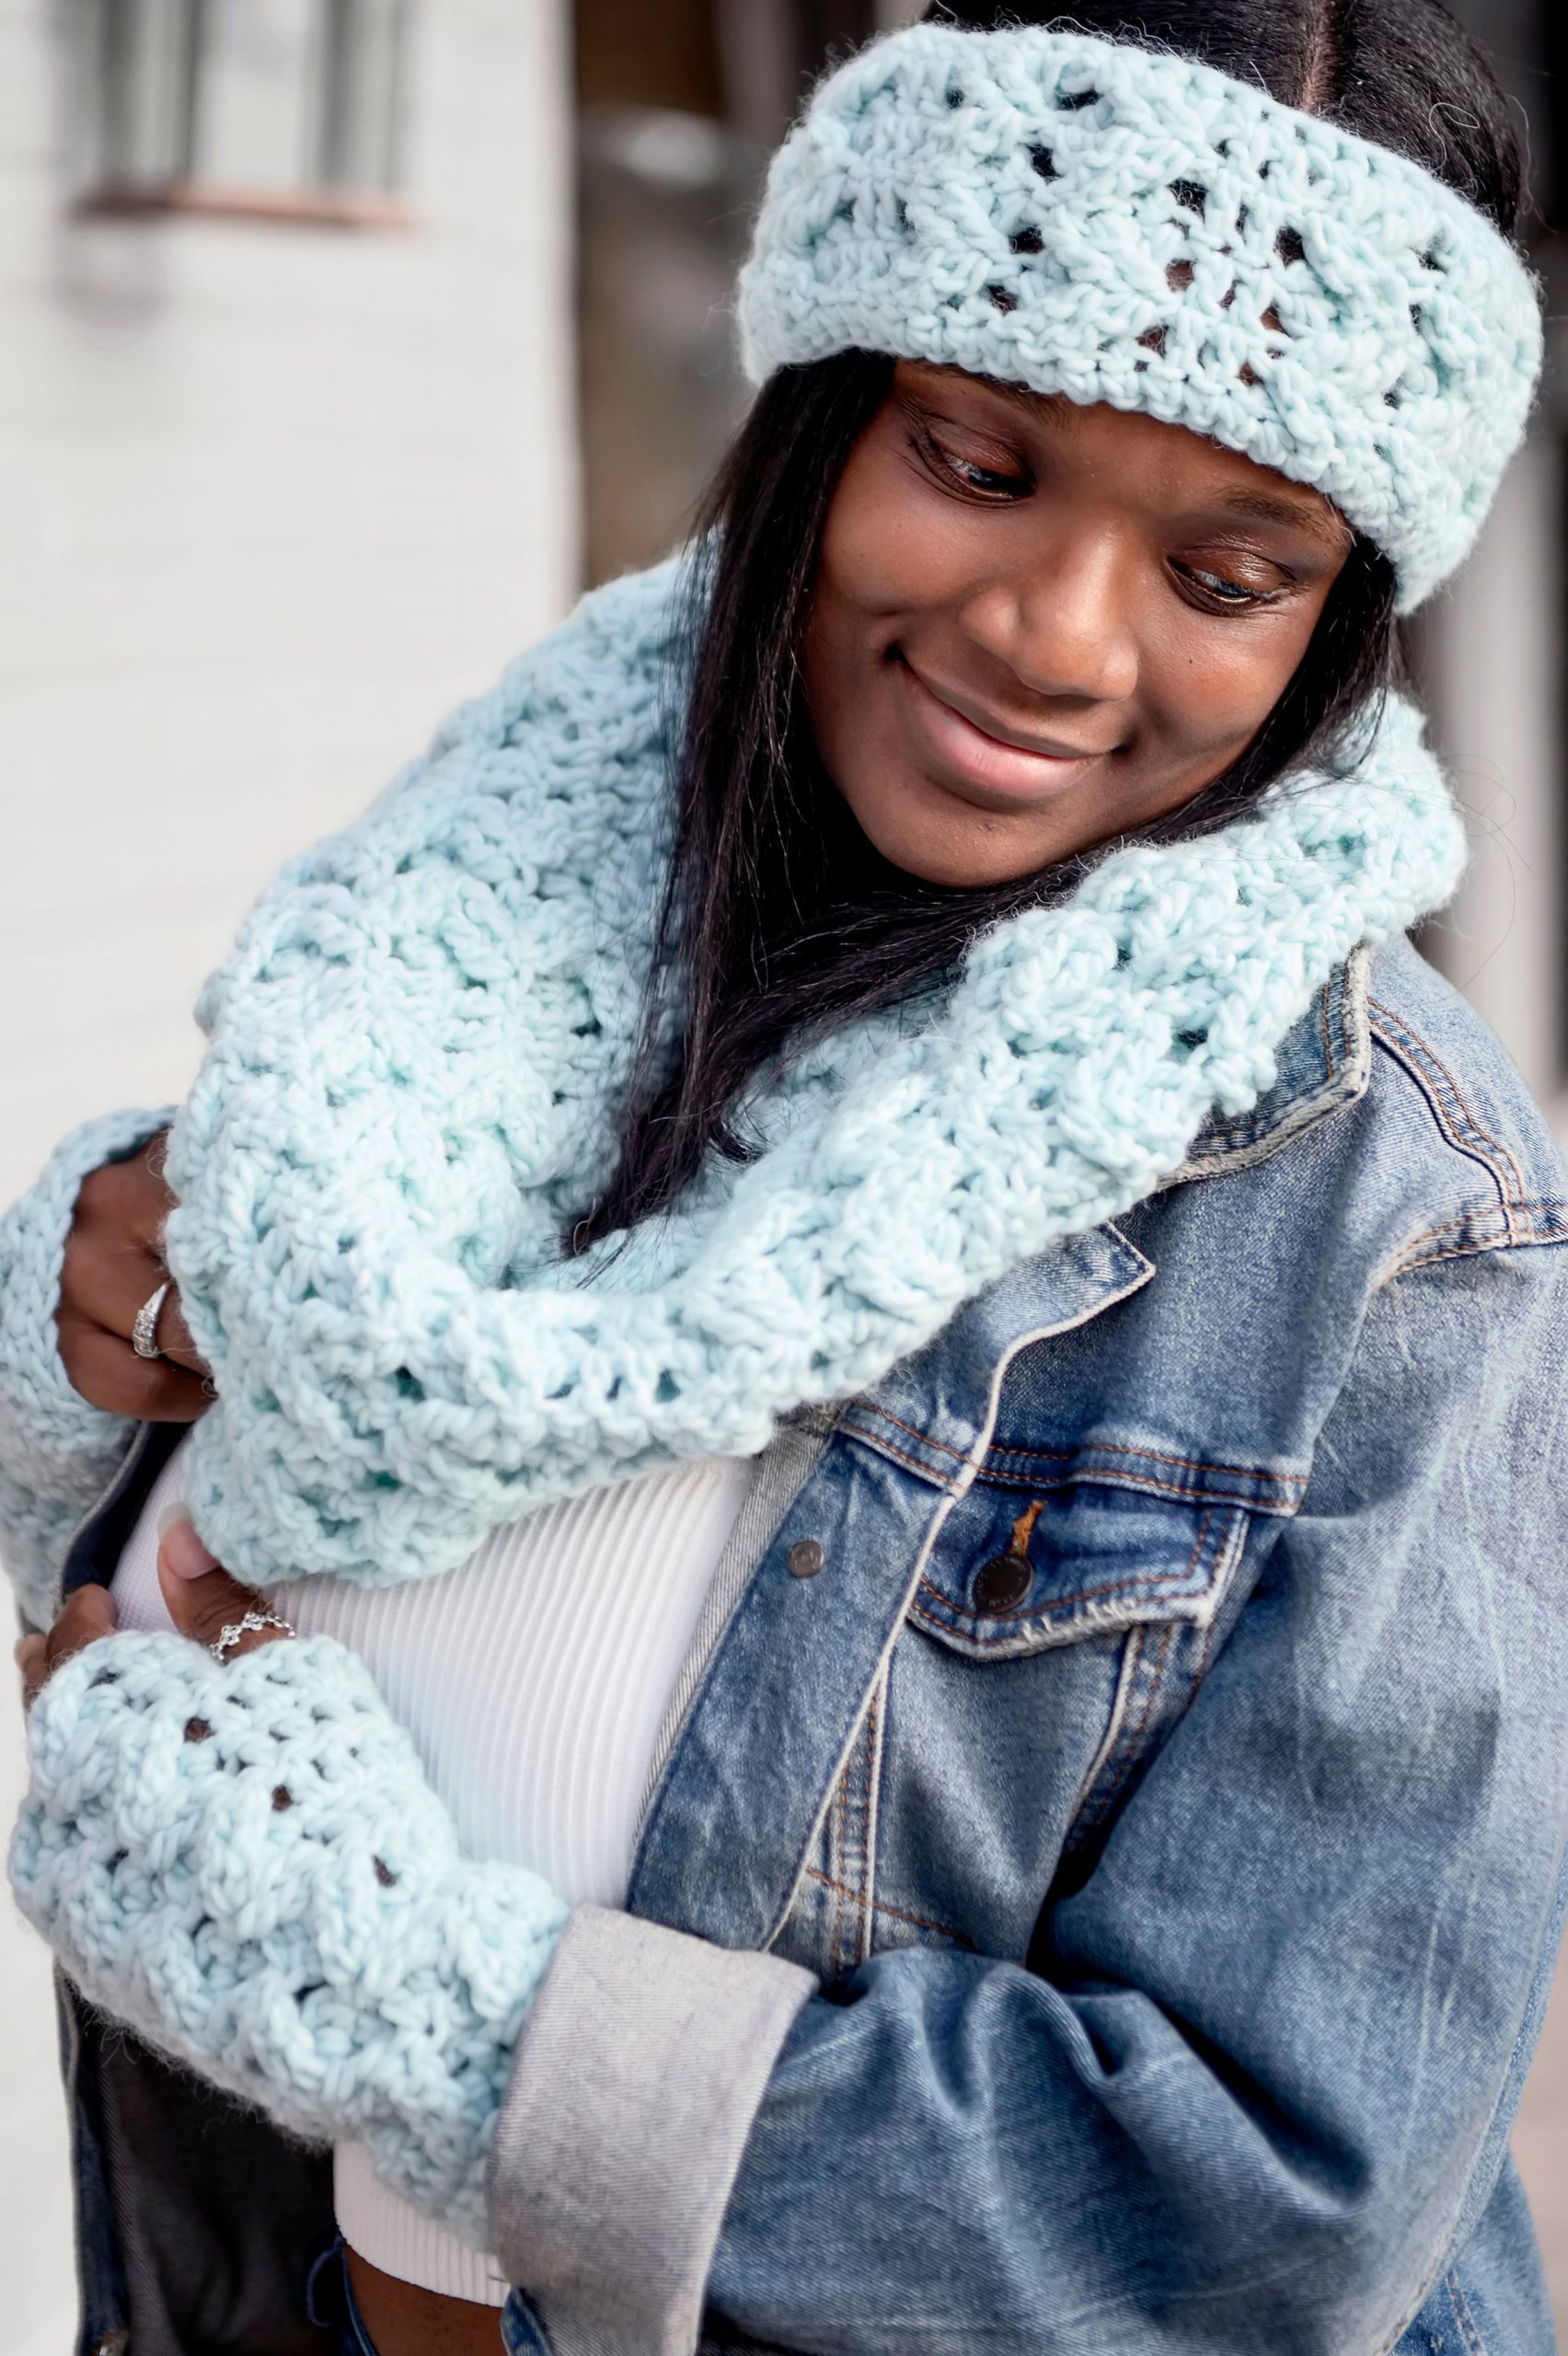 A woman looking downward and smiling while wearing a seafoam colored and textured crochet ear warmer, crochet cowl and crochet fingerless mitts